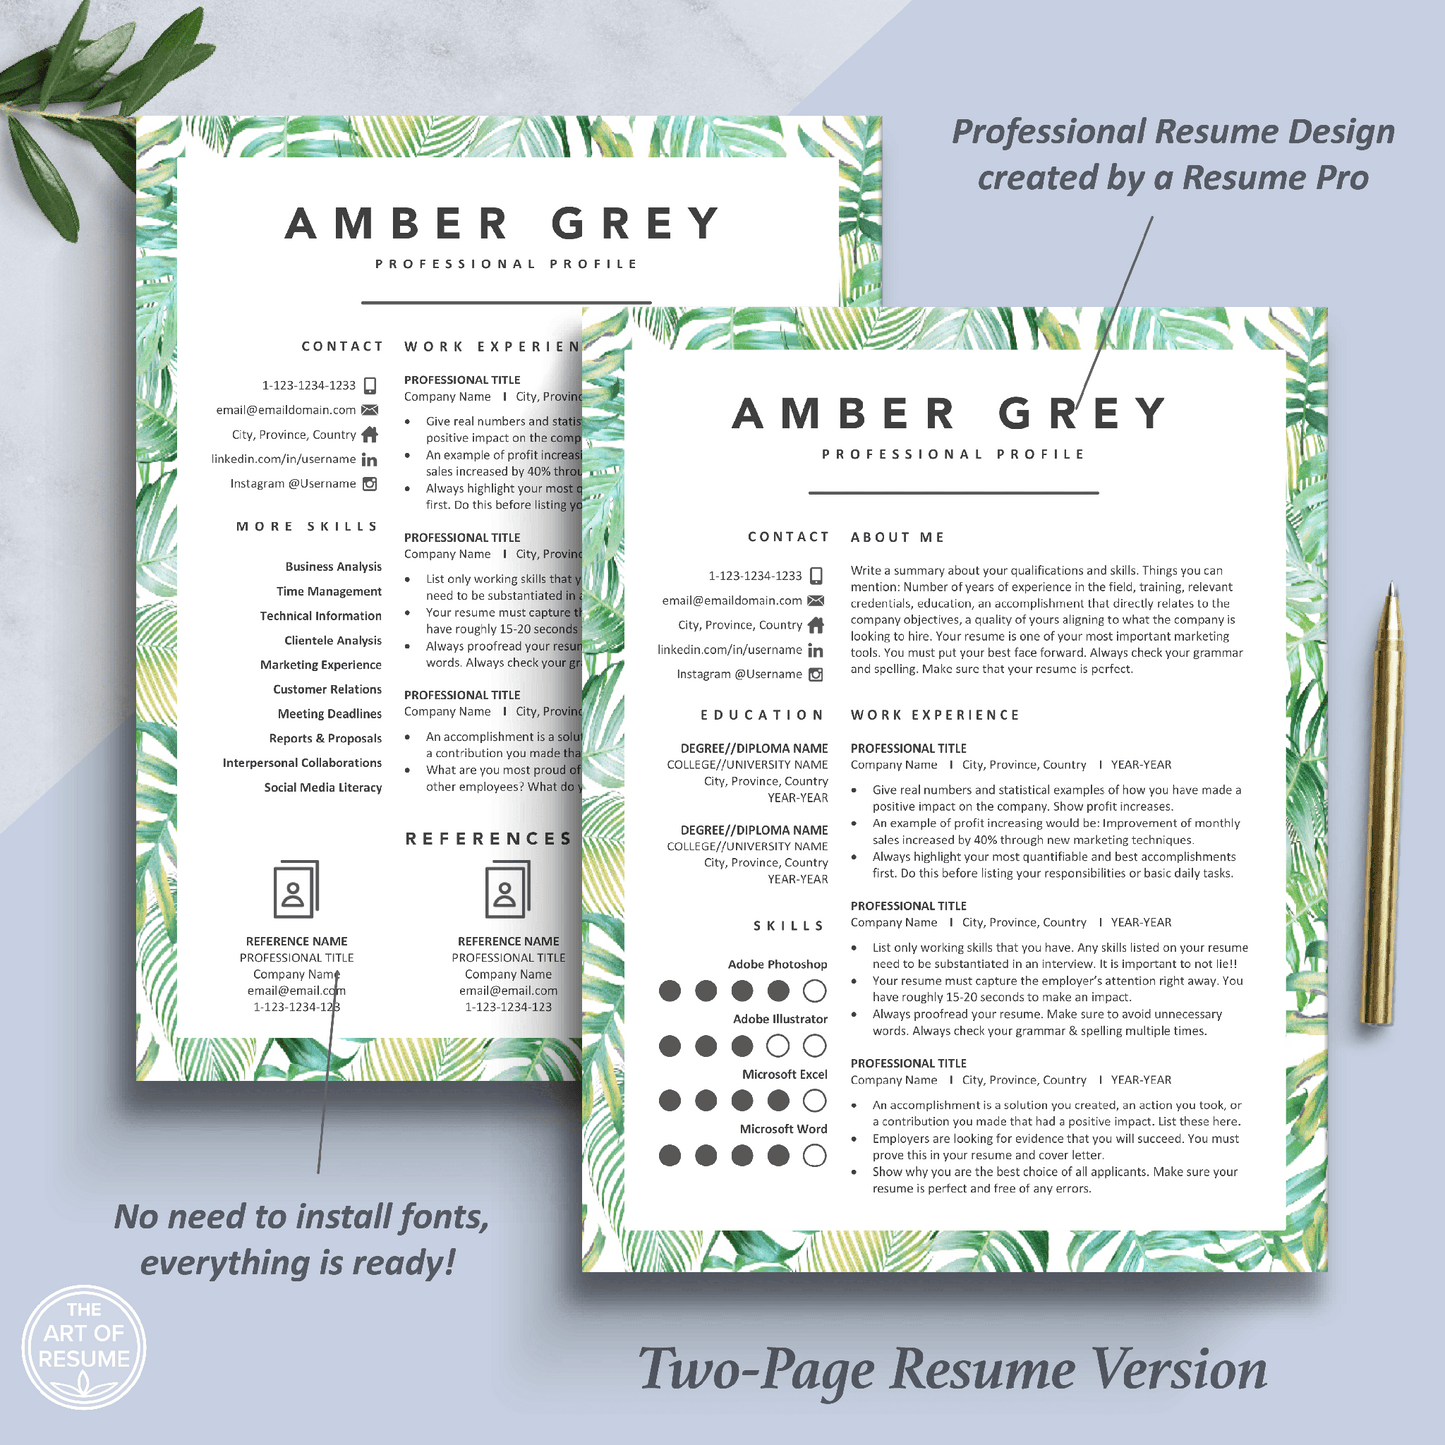 Creative CV Template Bundle | Floral Green Resume [Free Cover Letter] - The Art of Resume